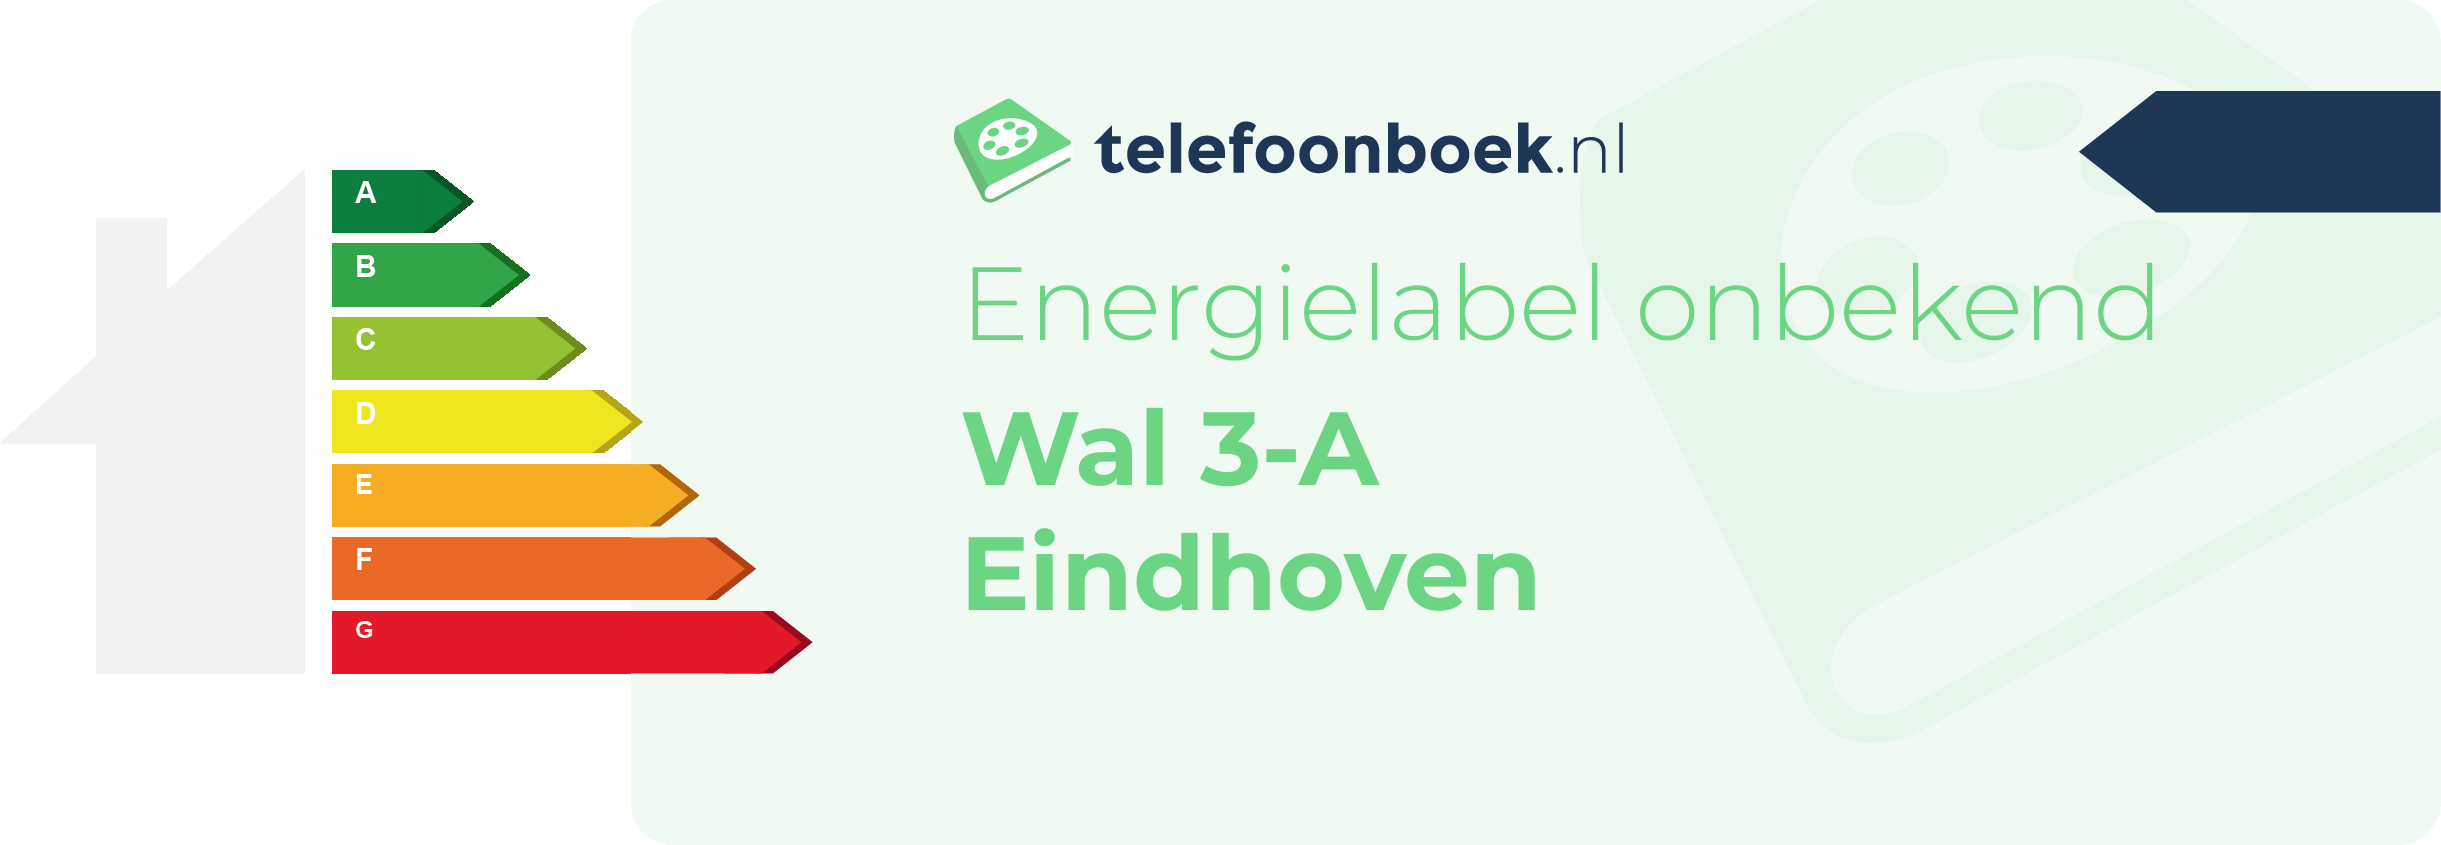 Energielabel Wal 3-A Eindhoven